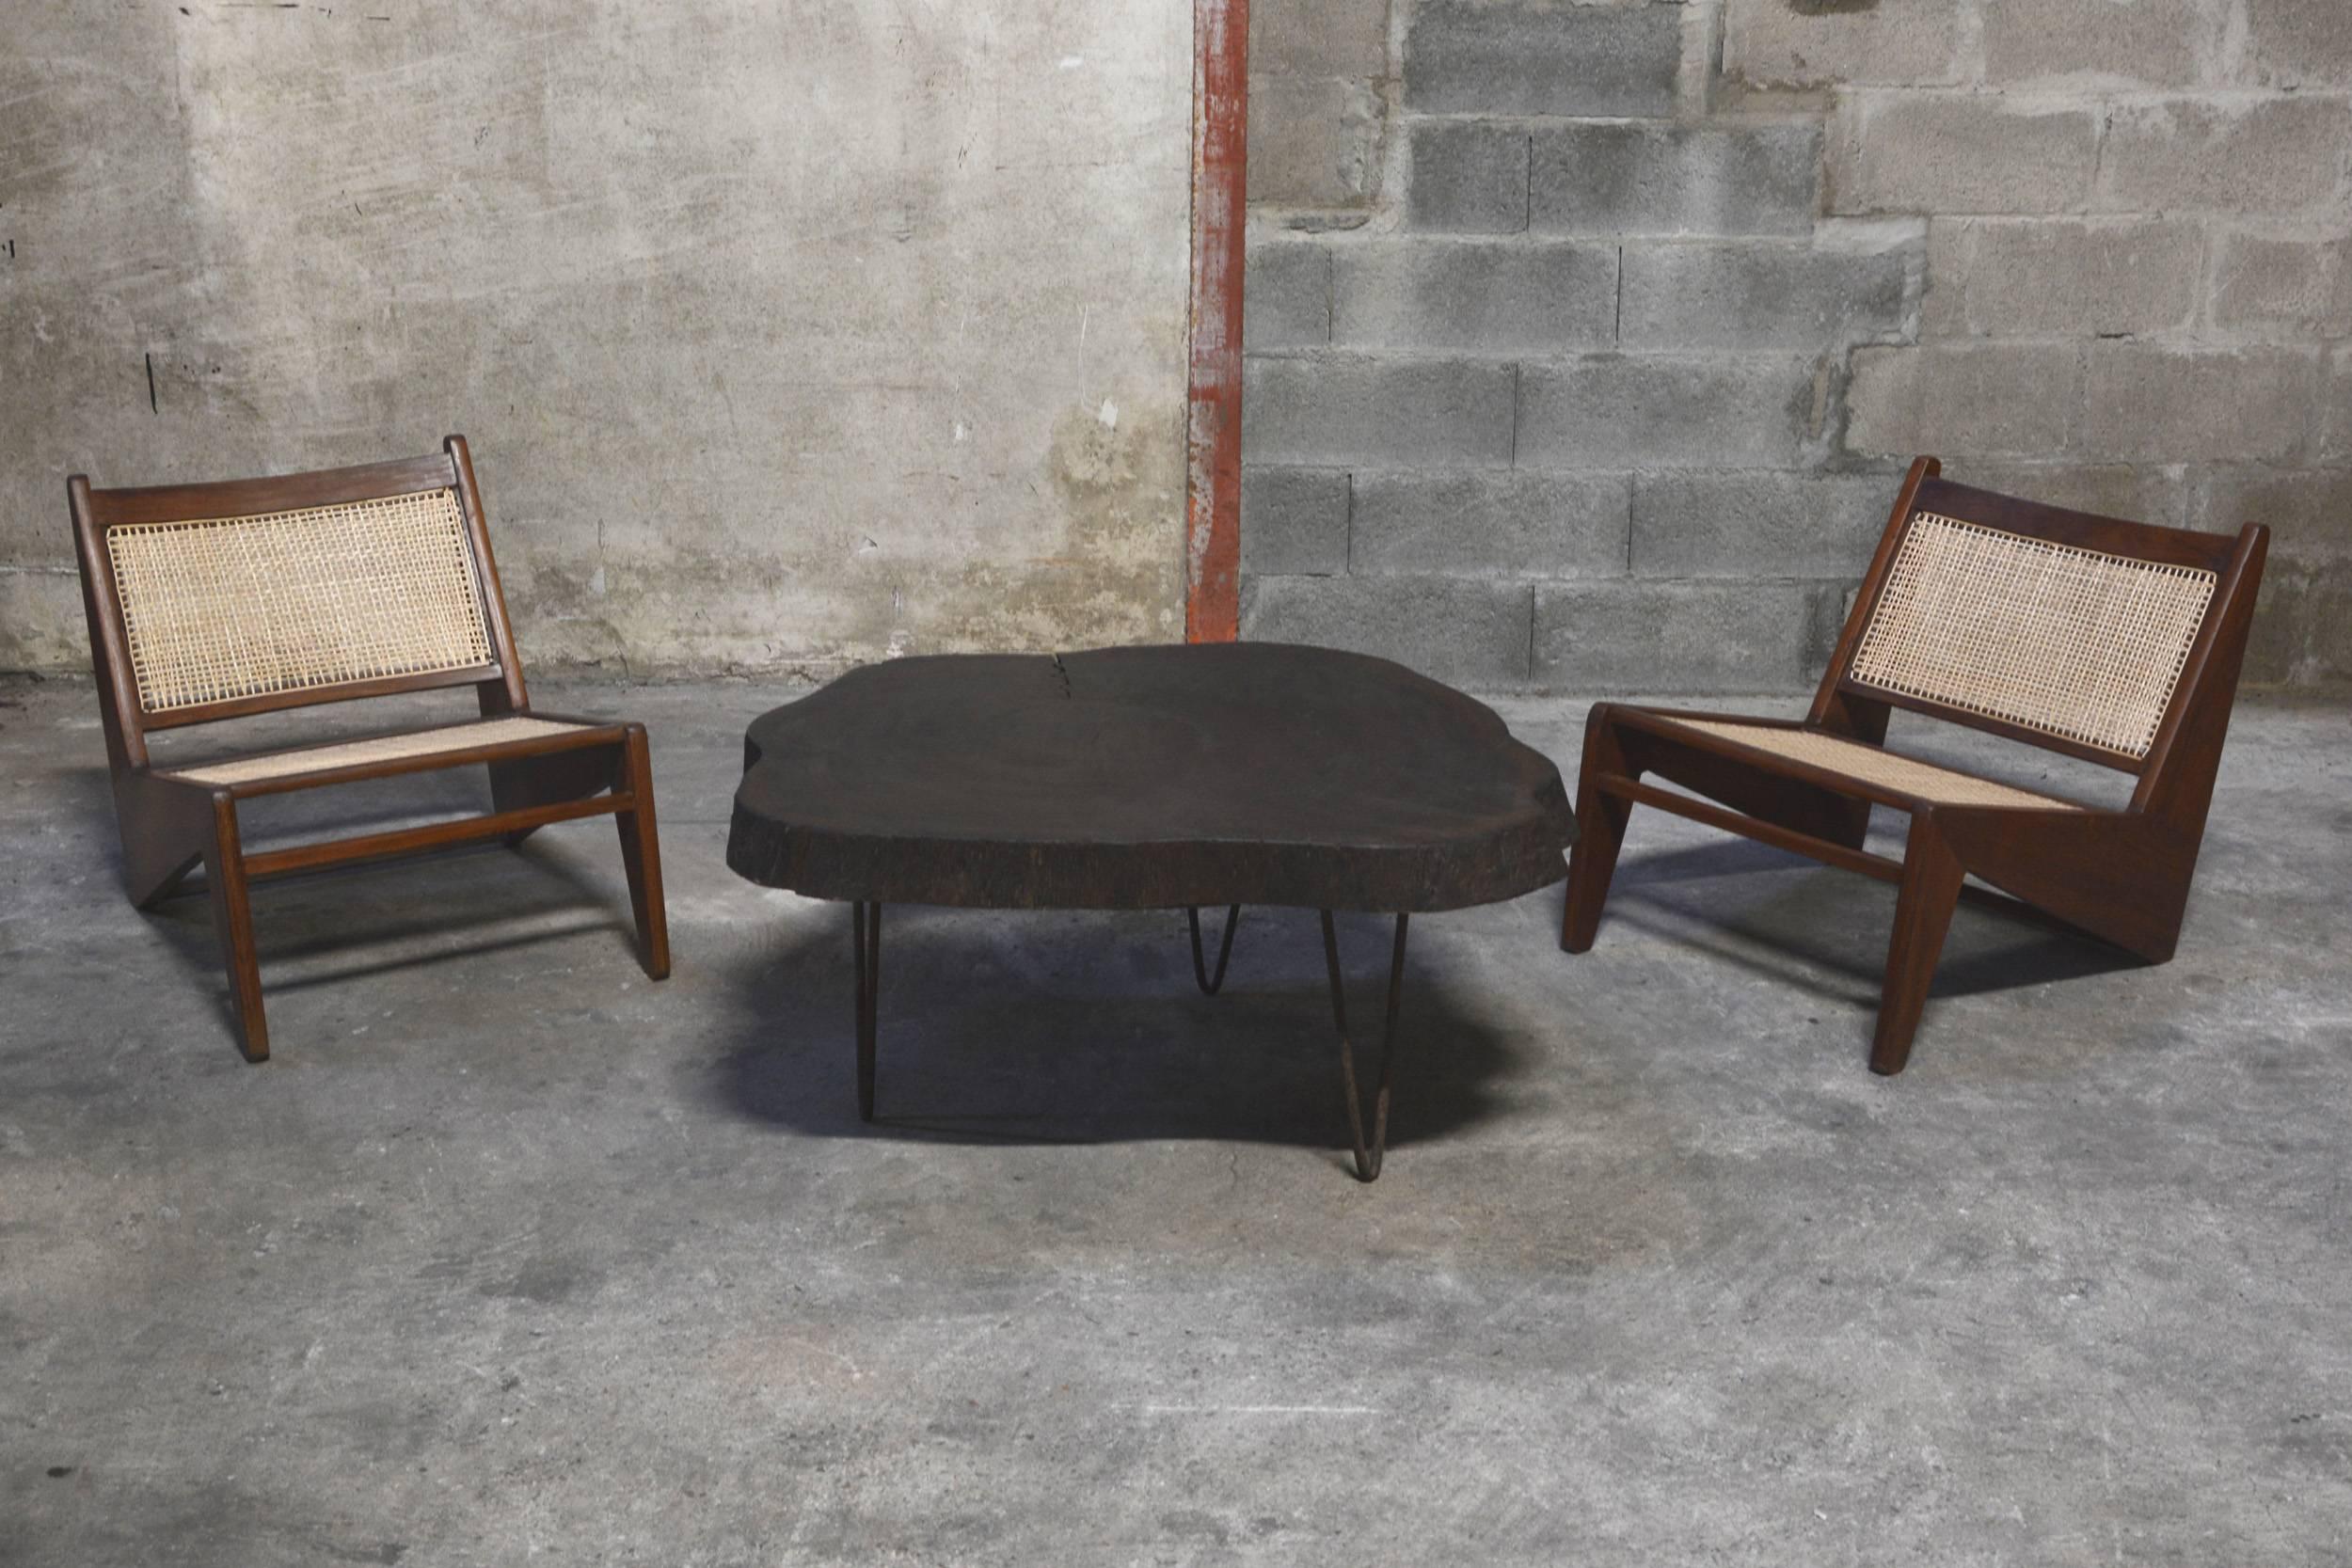 Pierre Jeanneret & Le Corbusier 'Tree Trunk' lounge table for the High Court and private residences in Chandigarh, India . Designed 1954-1955. Iron Mango plater fixed on three iron rods leg. The wood is cracked, the crack could expand in case of